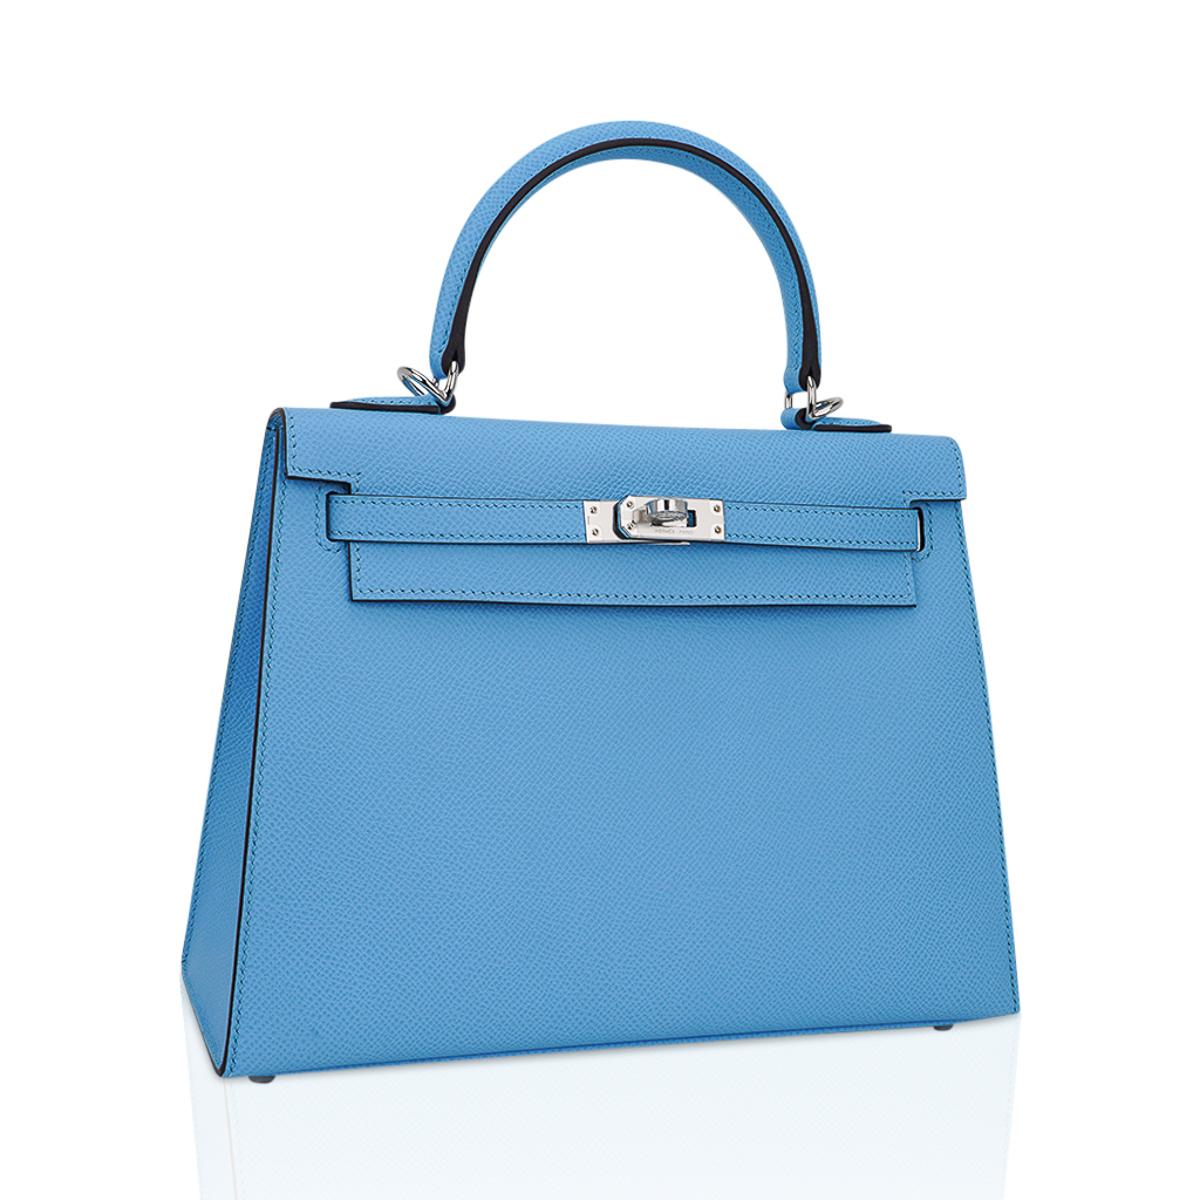 Mightychic offers an exquisite Hermes Kelly 25 Sellier bag featured in soft sky blue Bleu Celeste.
This beautiful Hermes Kelly bag colour is a beautiful year round neutral.
Accentuated with palladium hardware and epsom leather.
Comes with signature